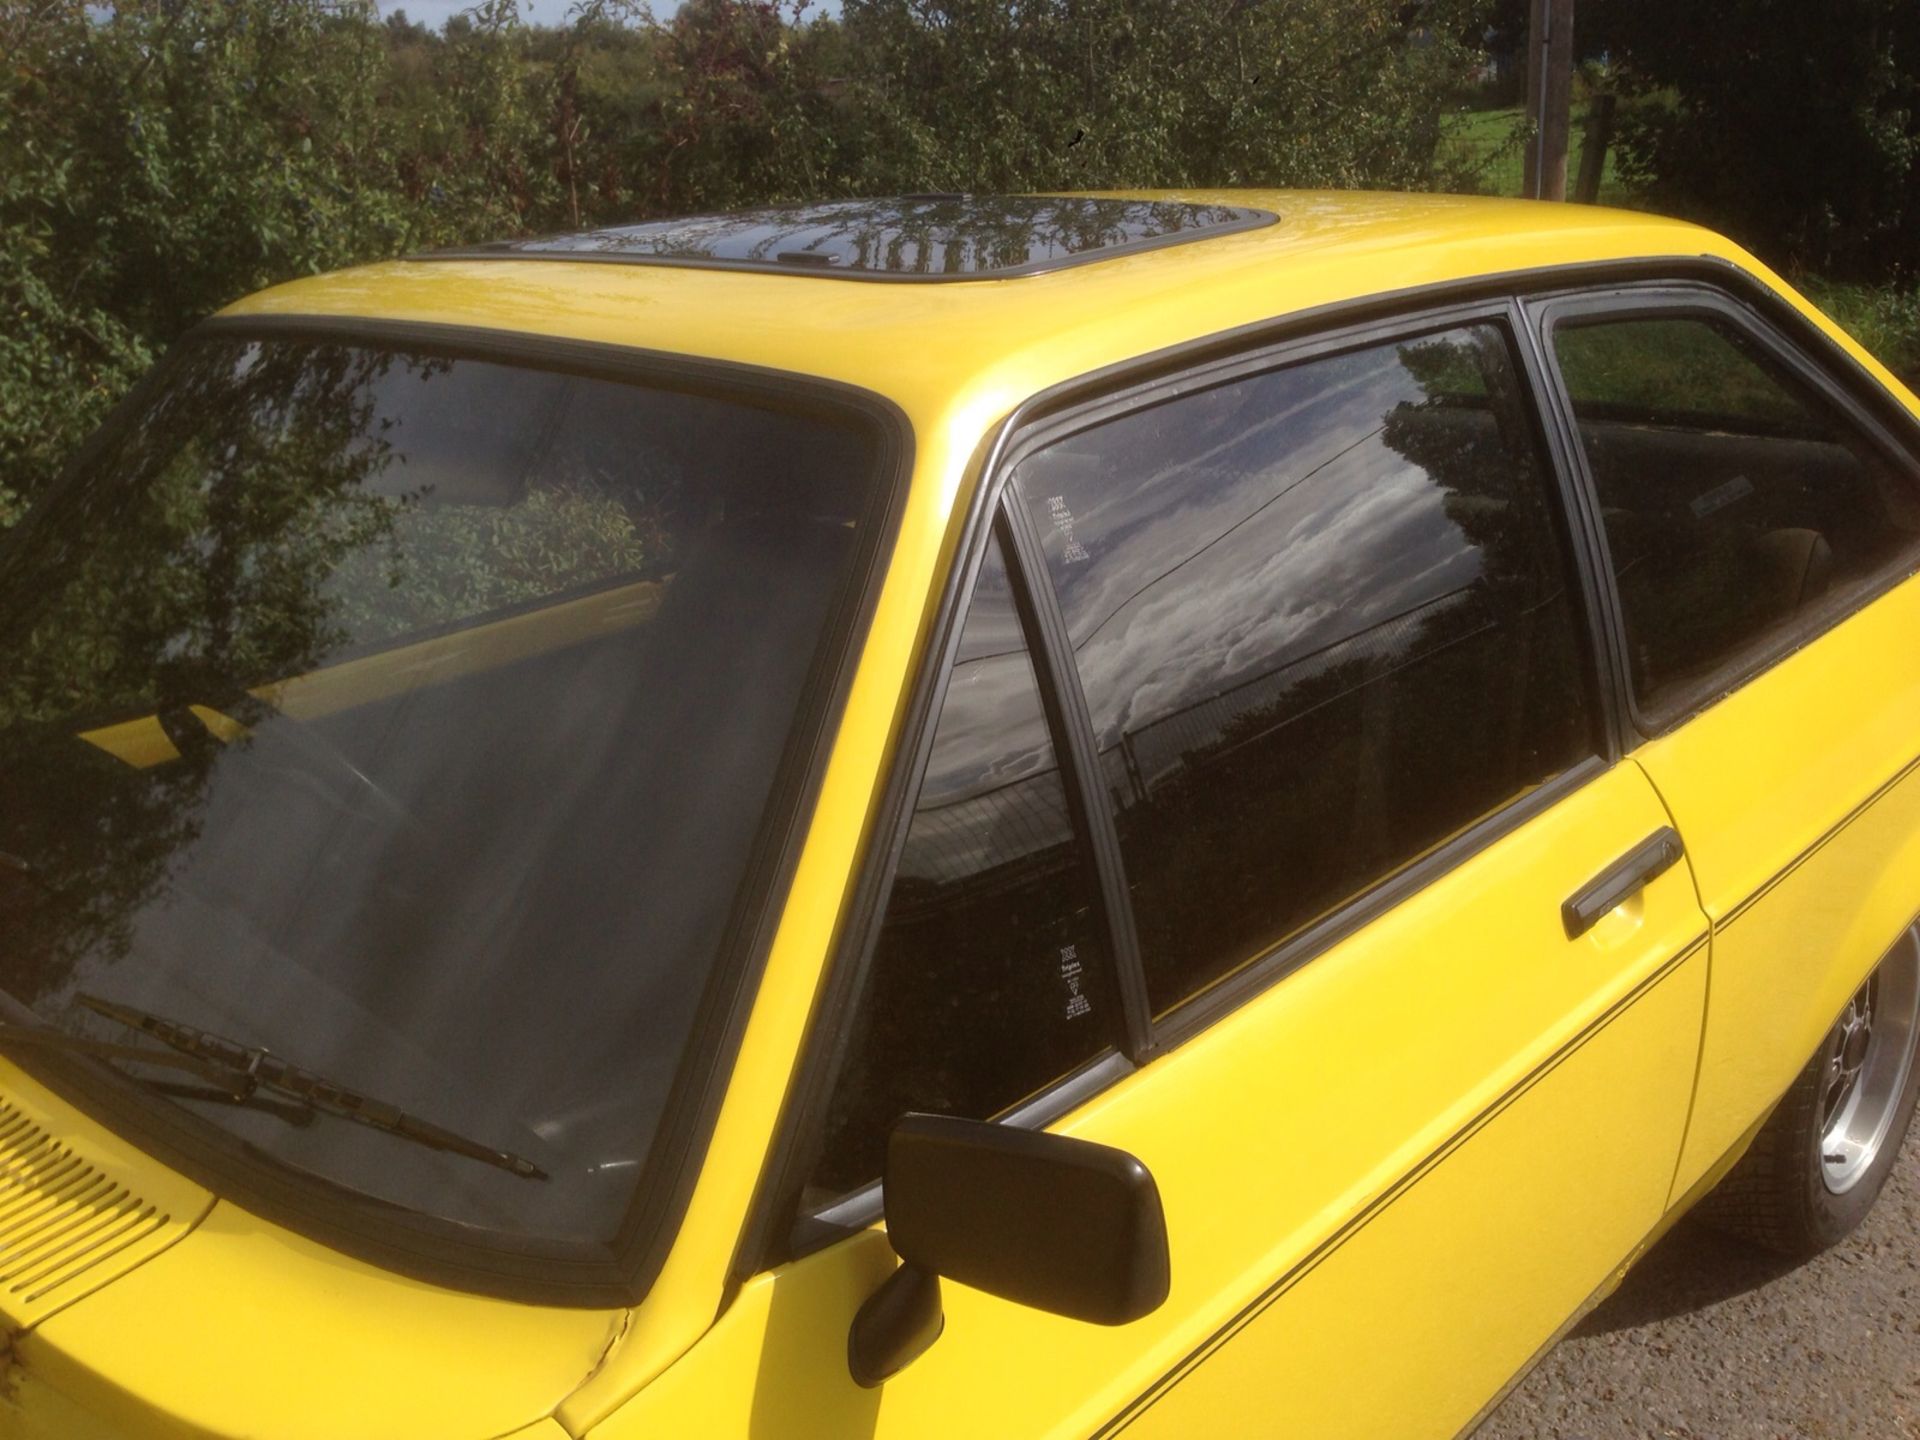 1979/T Ford Escort mk2 1600 Sport - in Signal yellow -  UK car  (545 miles) since rebuild - Image 16 of 54